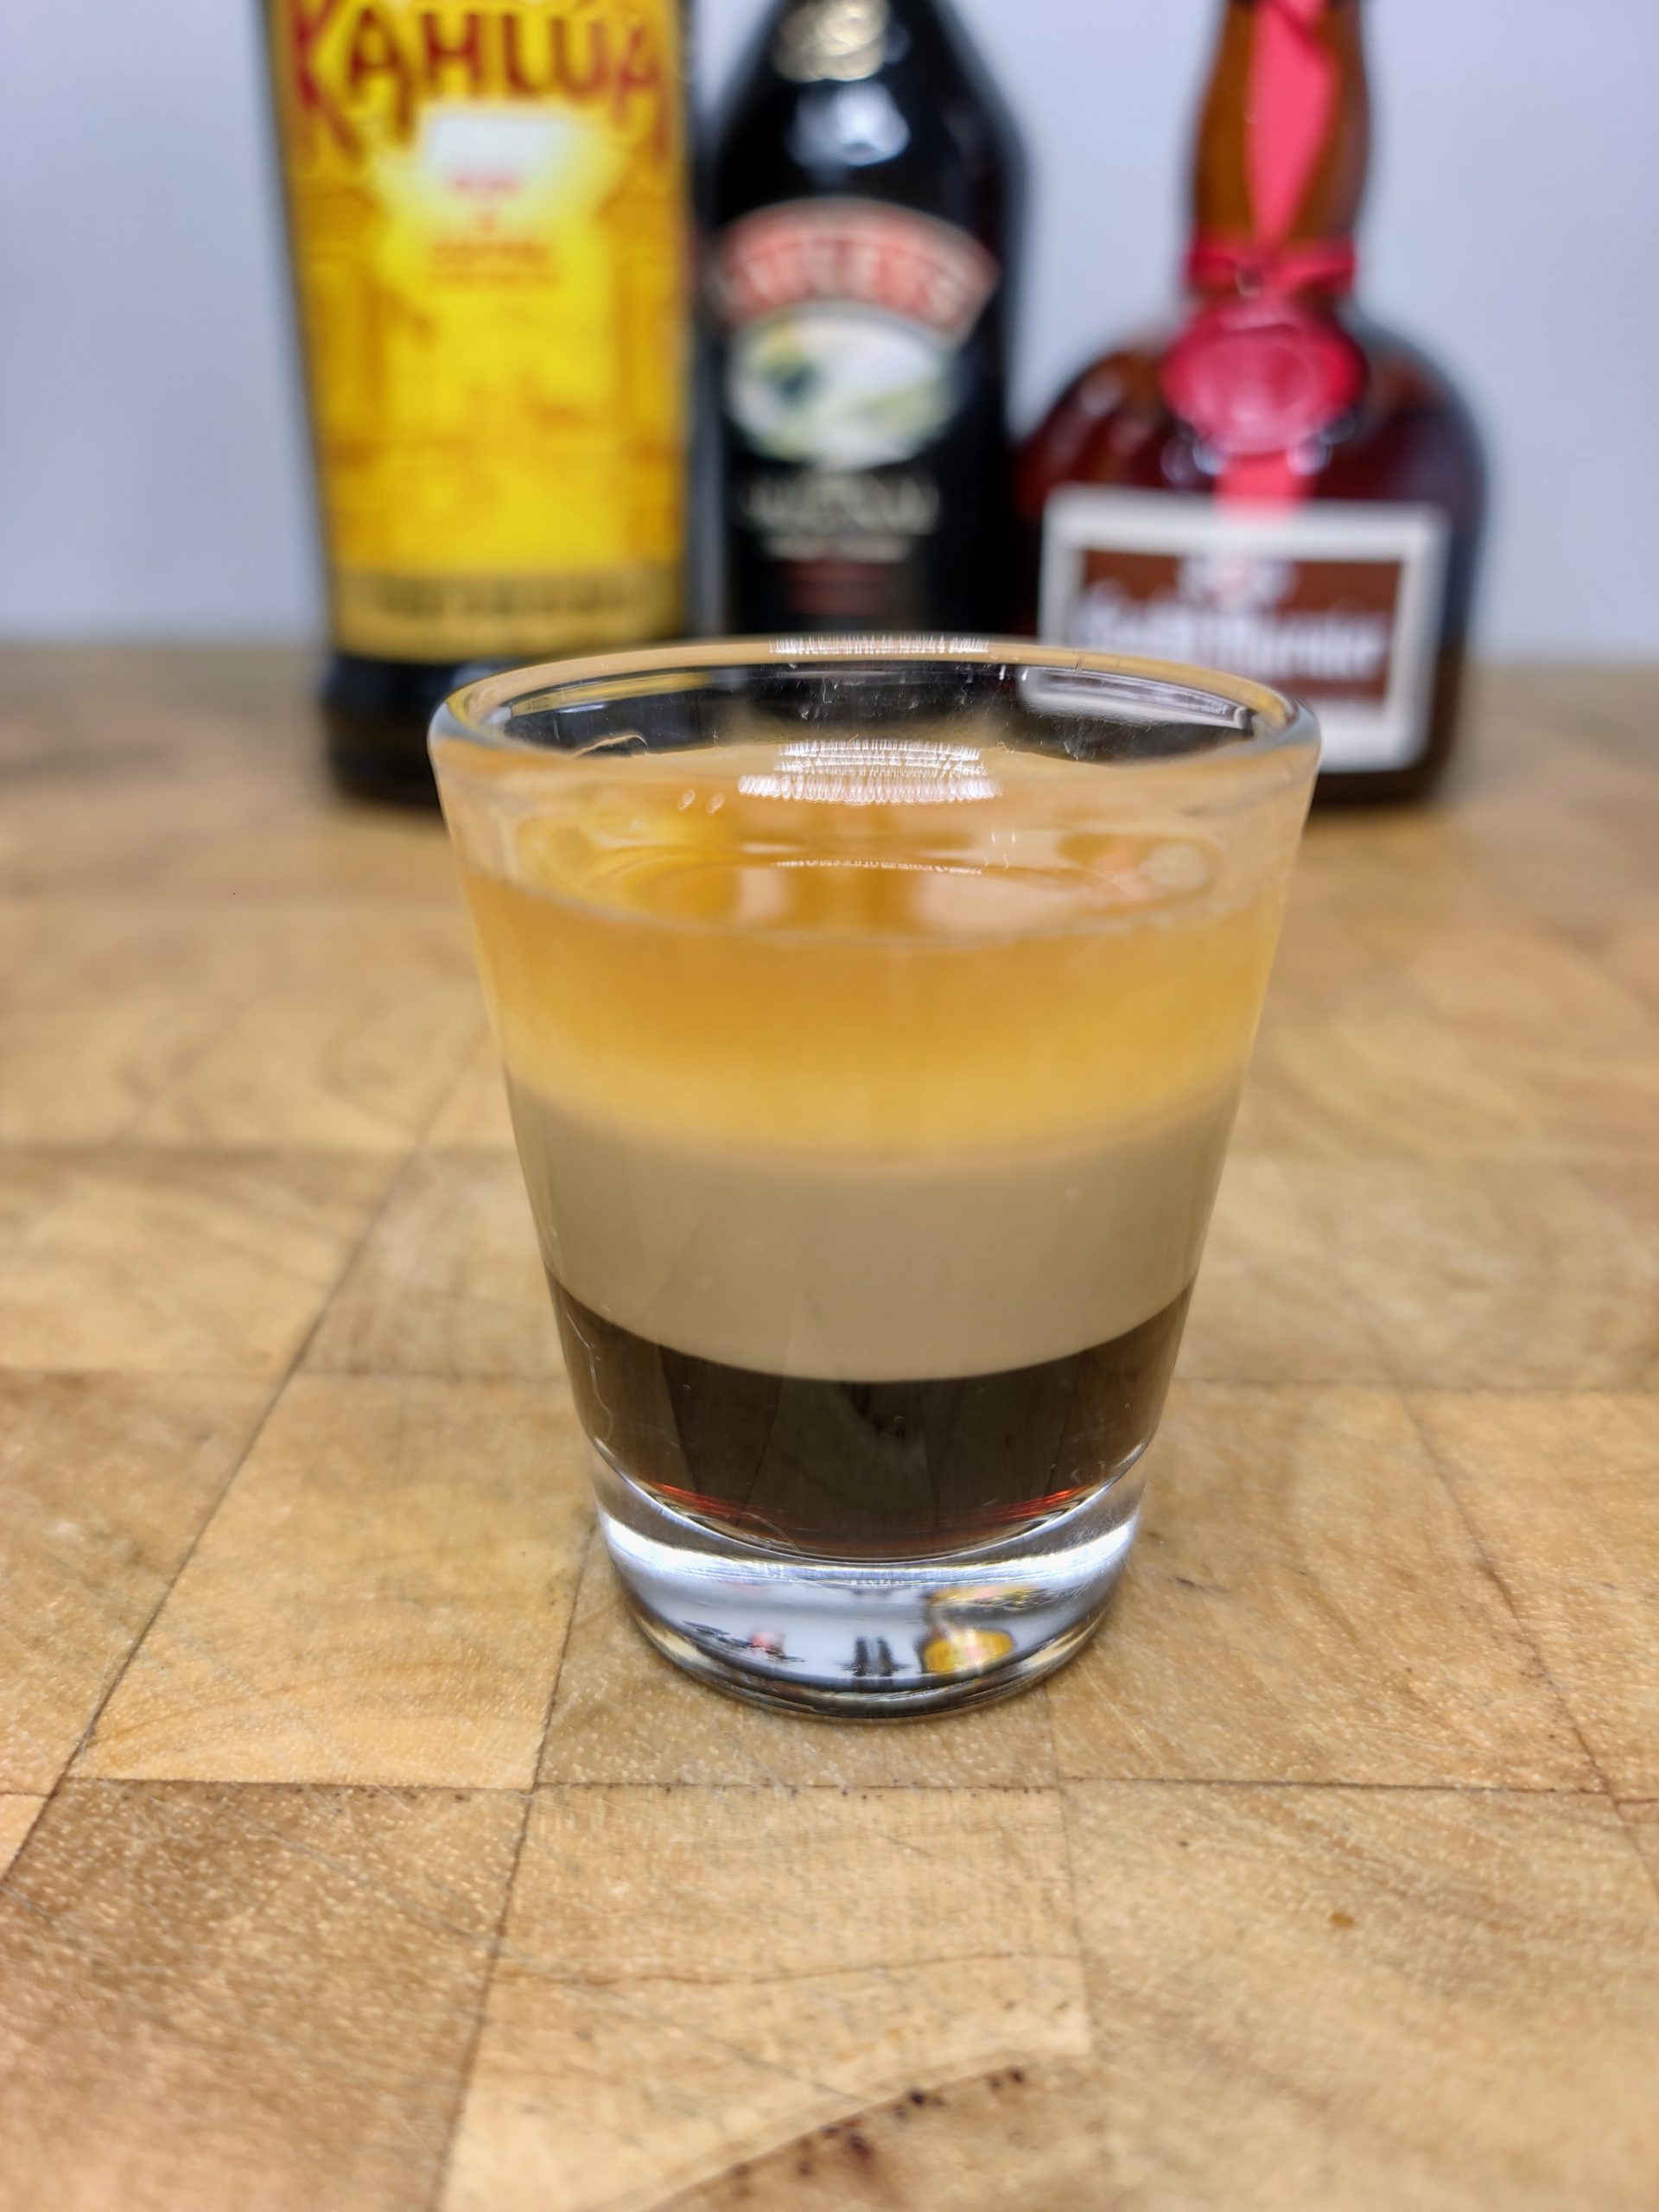 b52 shot with bottles in background